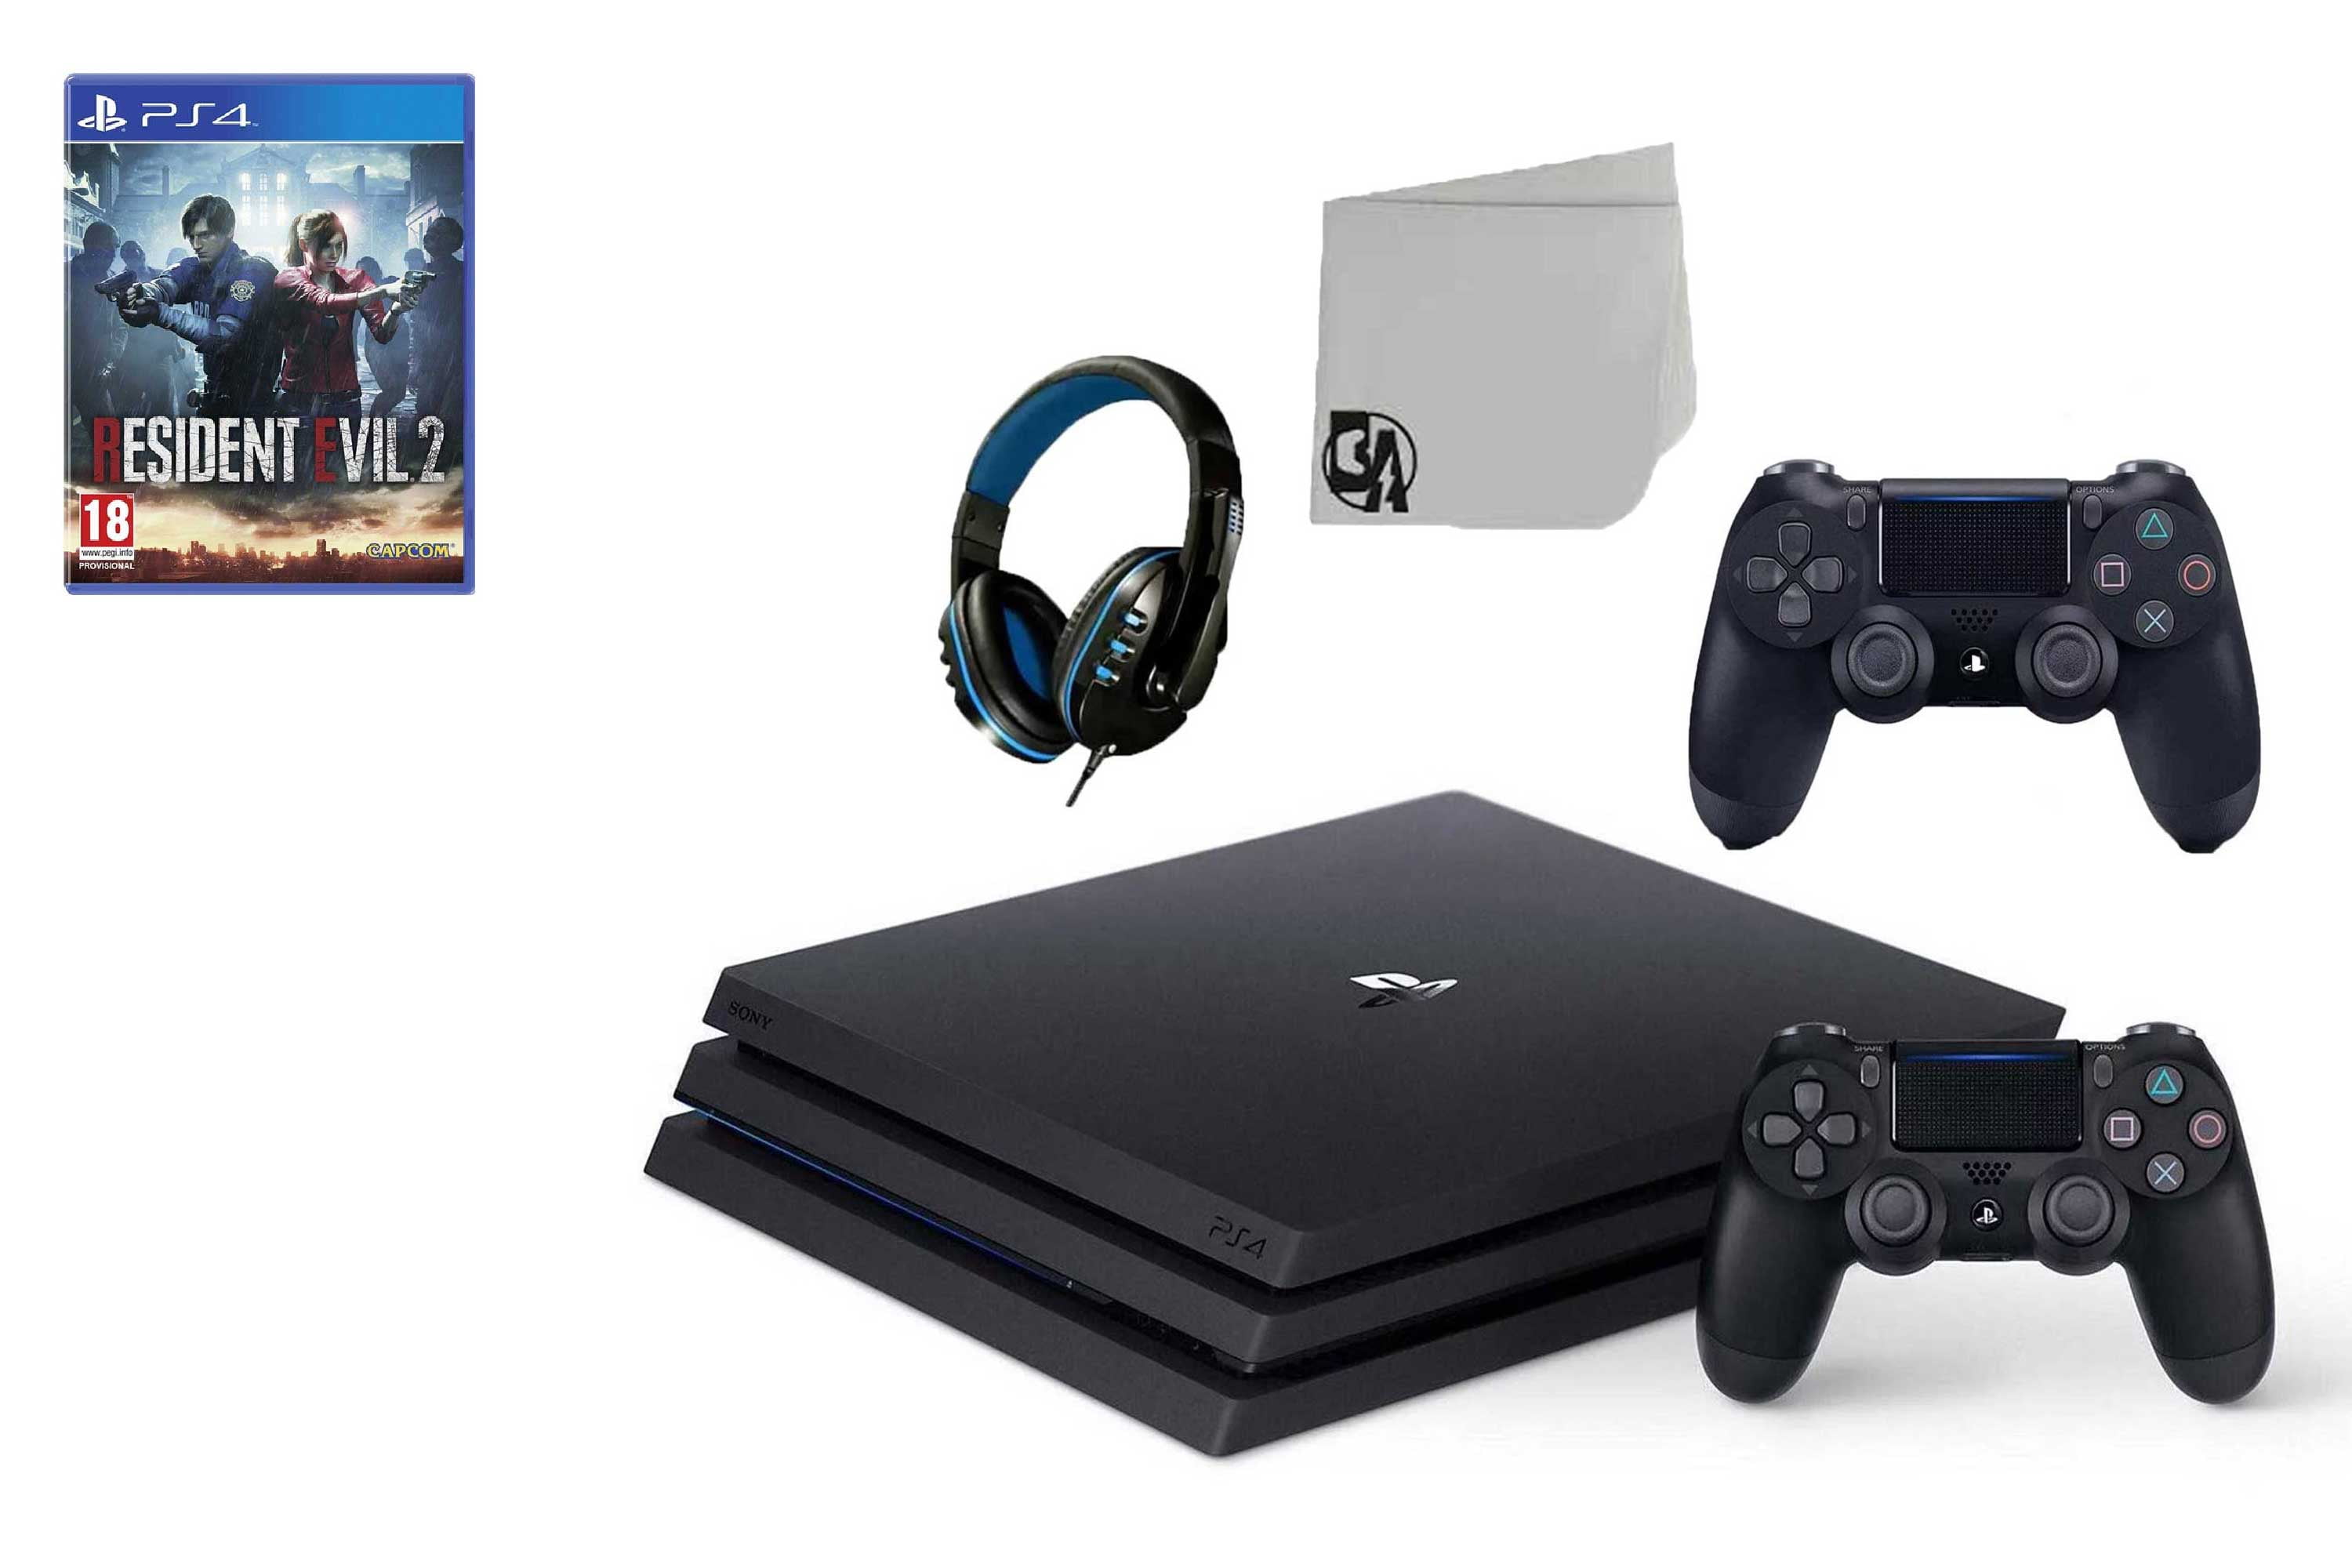 Sony PlayStation 4 Pro Gaming Black 2 Controller Included with Resident Evil 2 AXTION Bundle Like New - Walmart.com